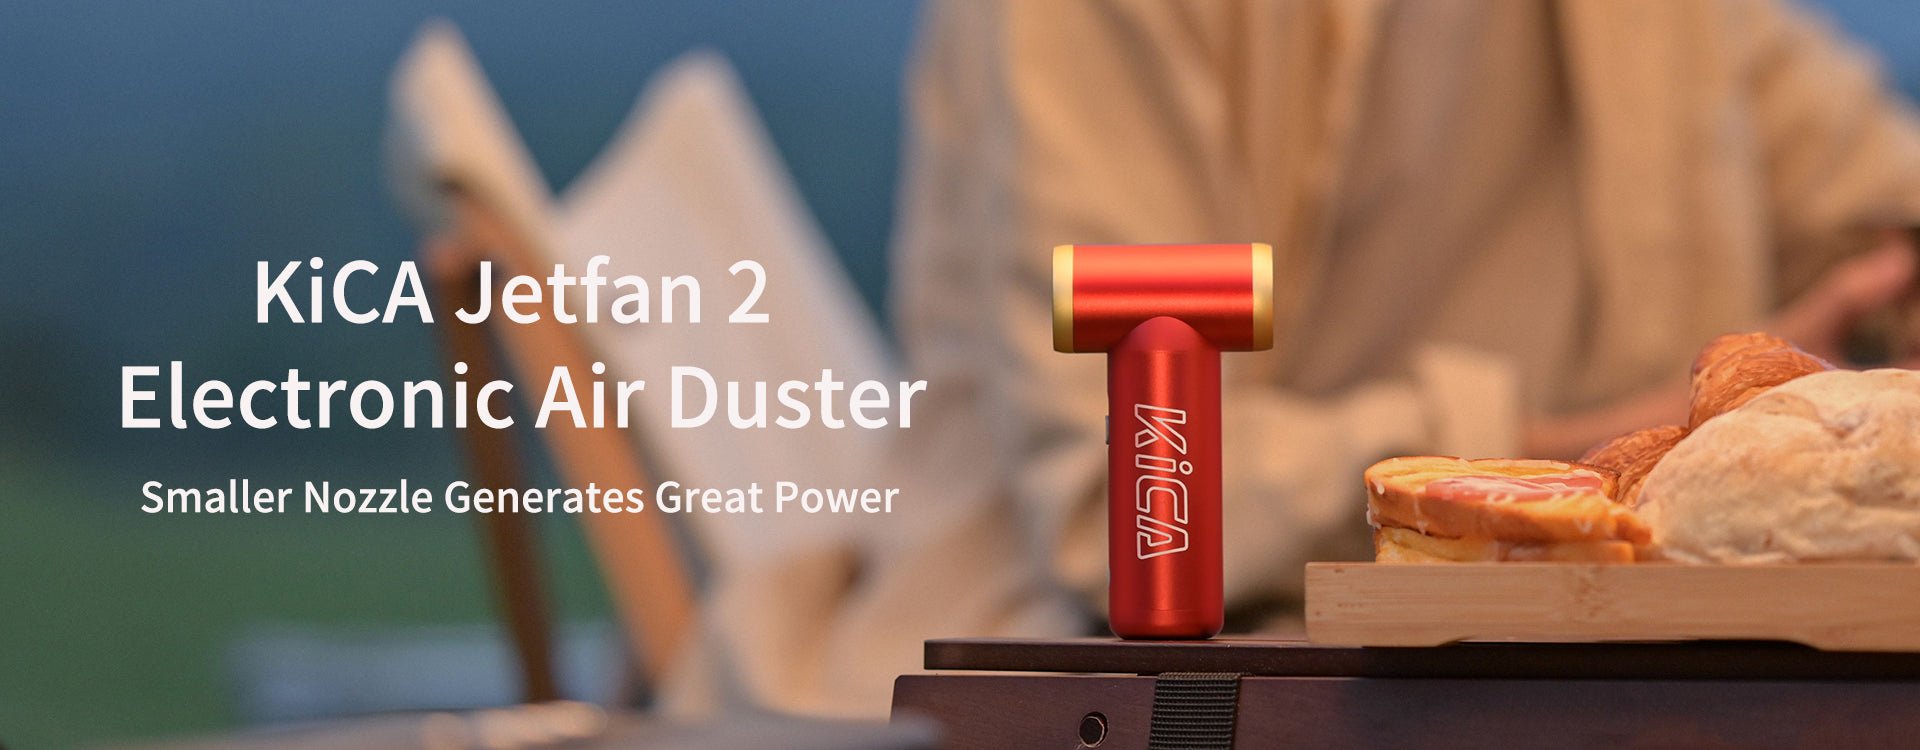 Kica - Jetfan 2 - Portable, More Powerful, and Multi-functional Air Duster